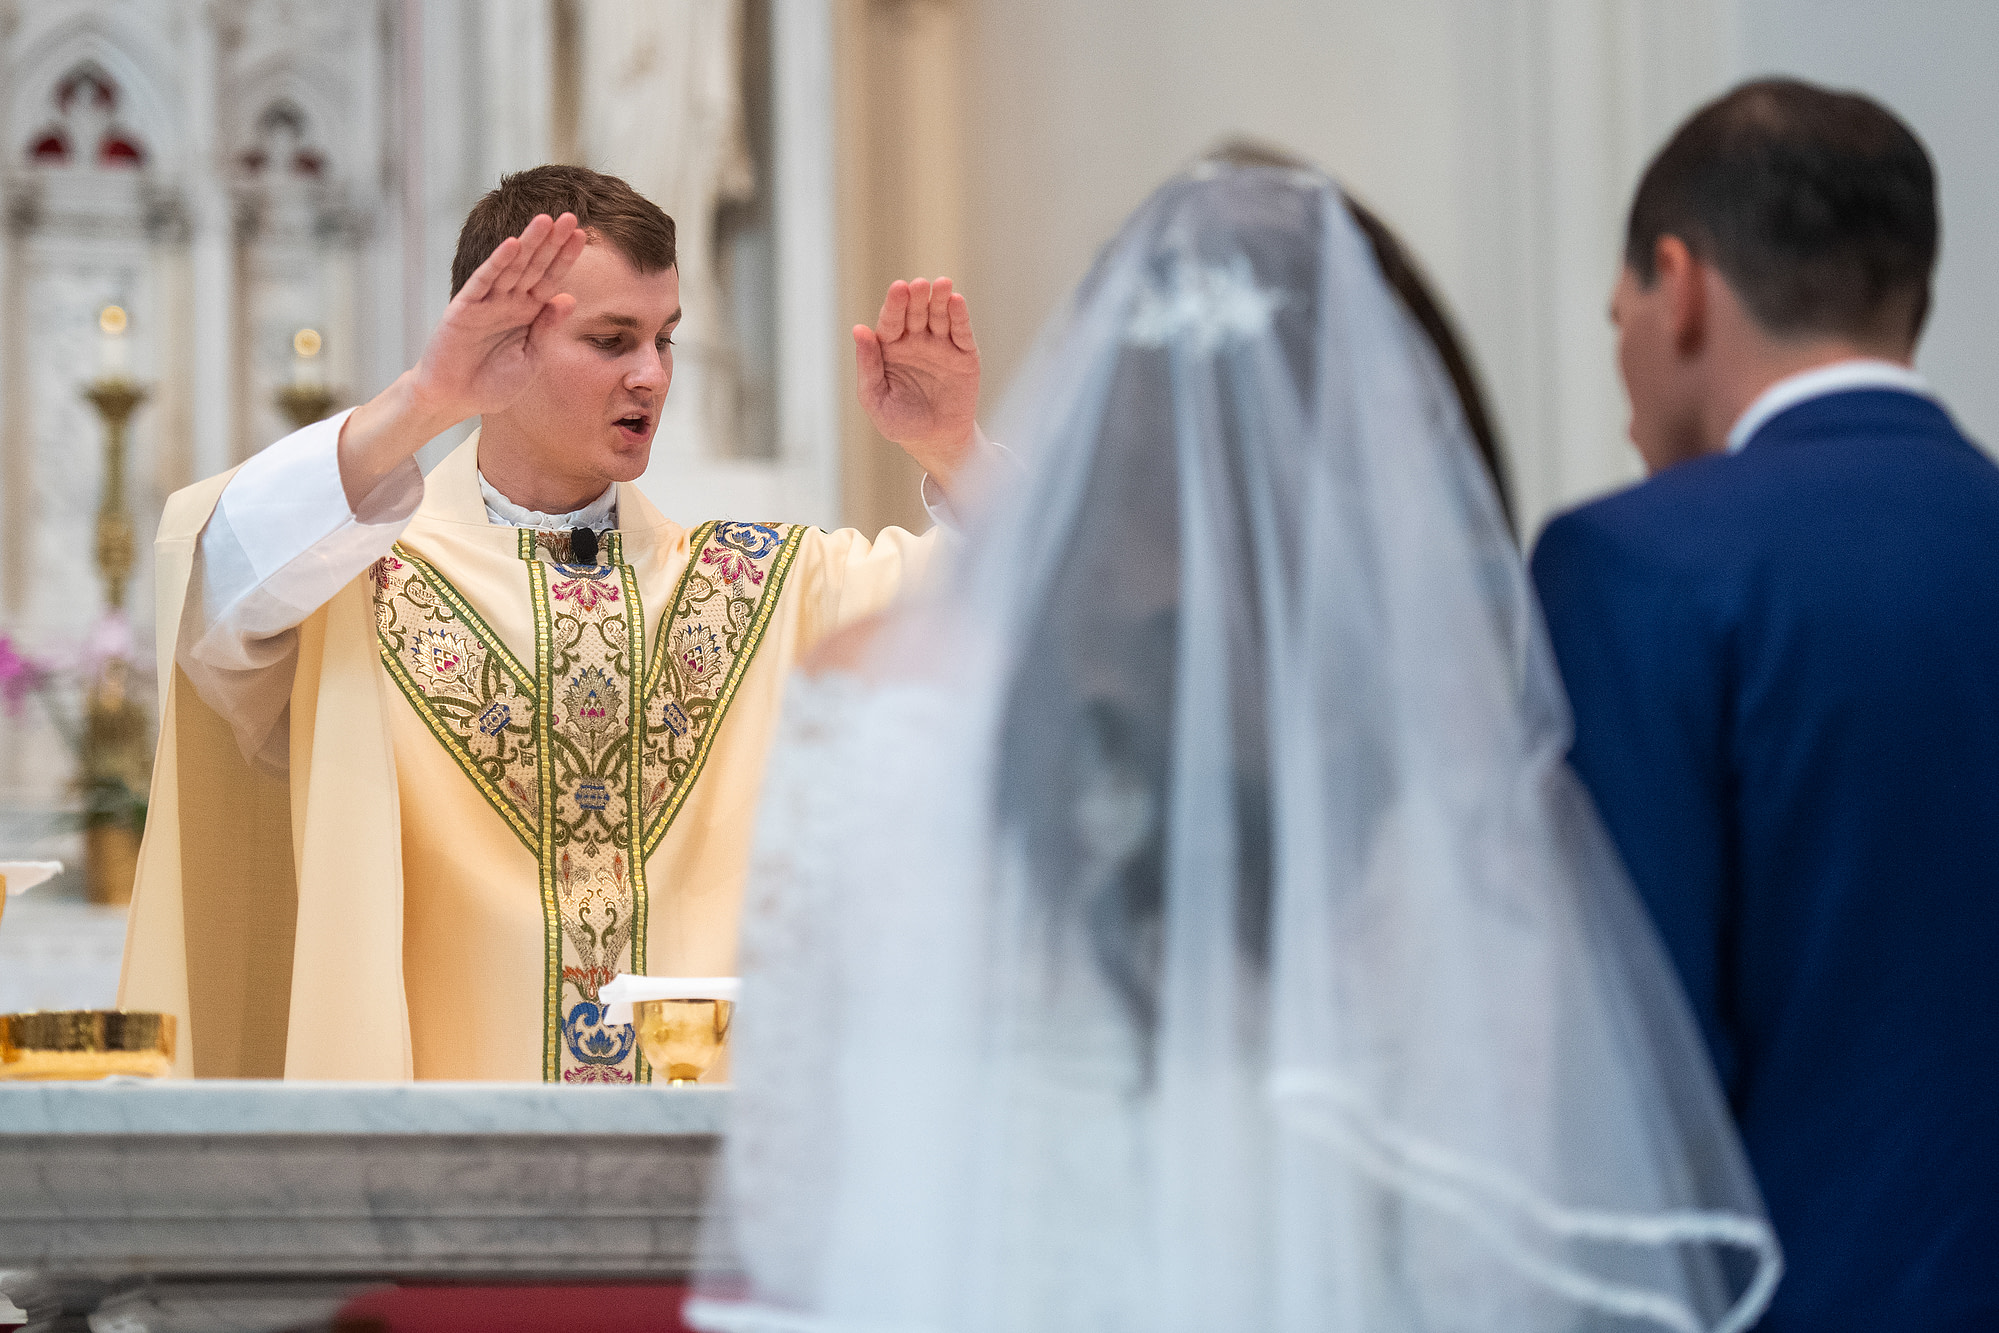 A priest prays over the bride and groom during their wedding at the Cathedral Basilica of the Immaculate Conception in Denver, Colorado.